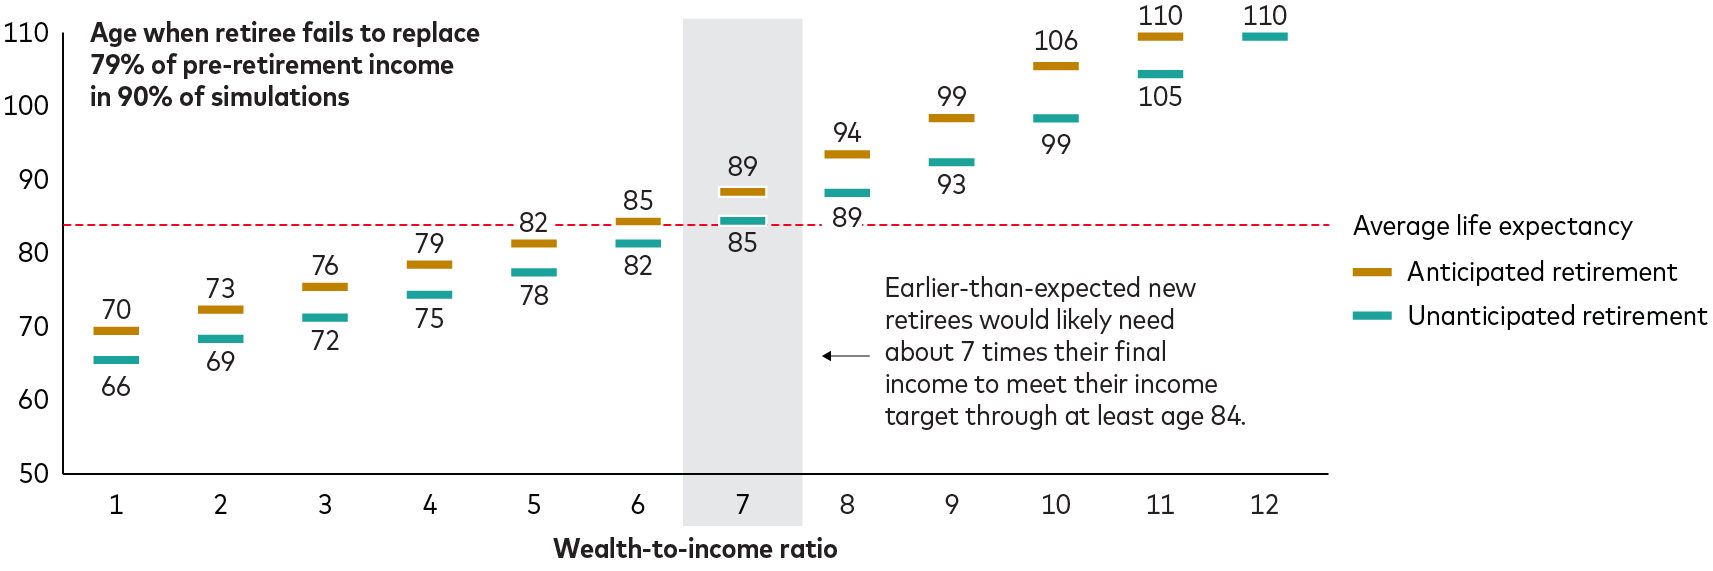 The horizontal axis represents the amount of wealth from 1 to 12 times that of preretirement income. The  vertical axis represents the age when that wealth can no longer provide 79% of preretirement income in at least 90% of our model simulations. Only the those with 7 times preretirement income or more were able to meet the criteria through age 84.